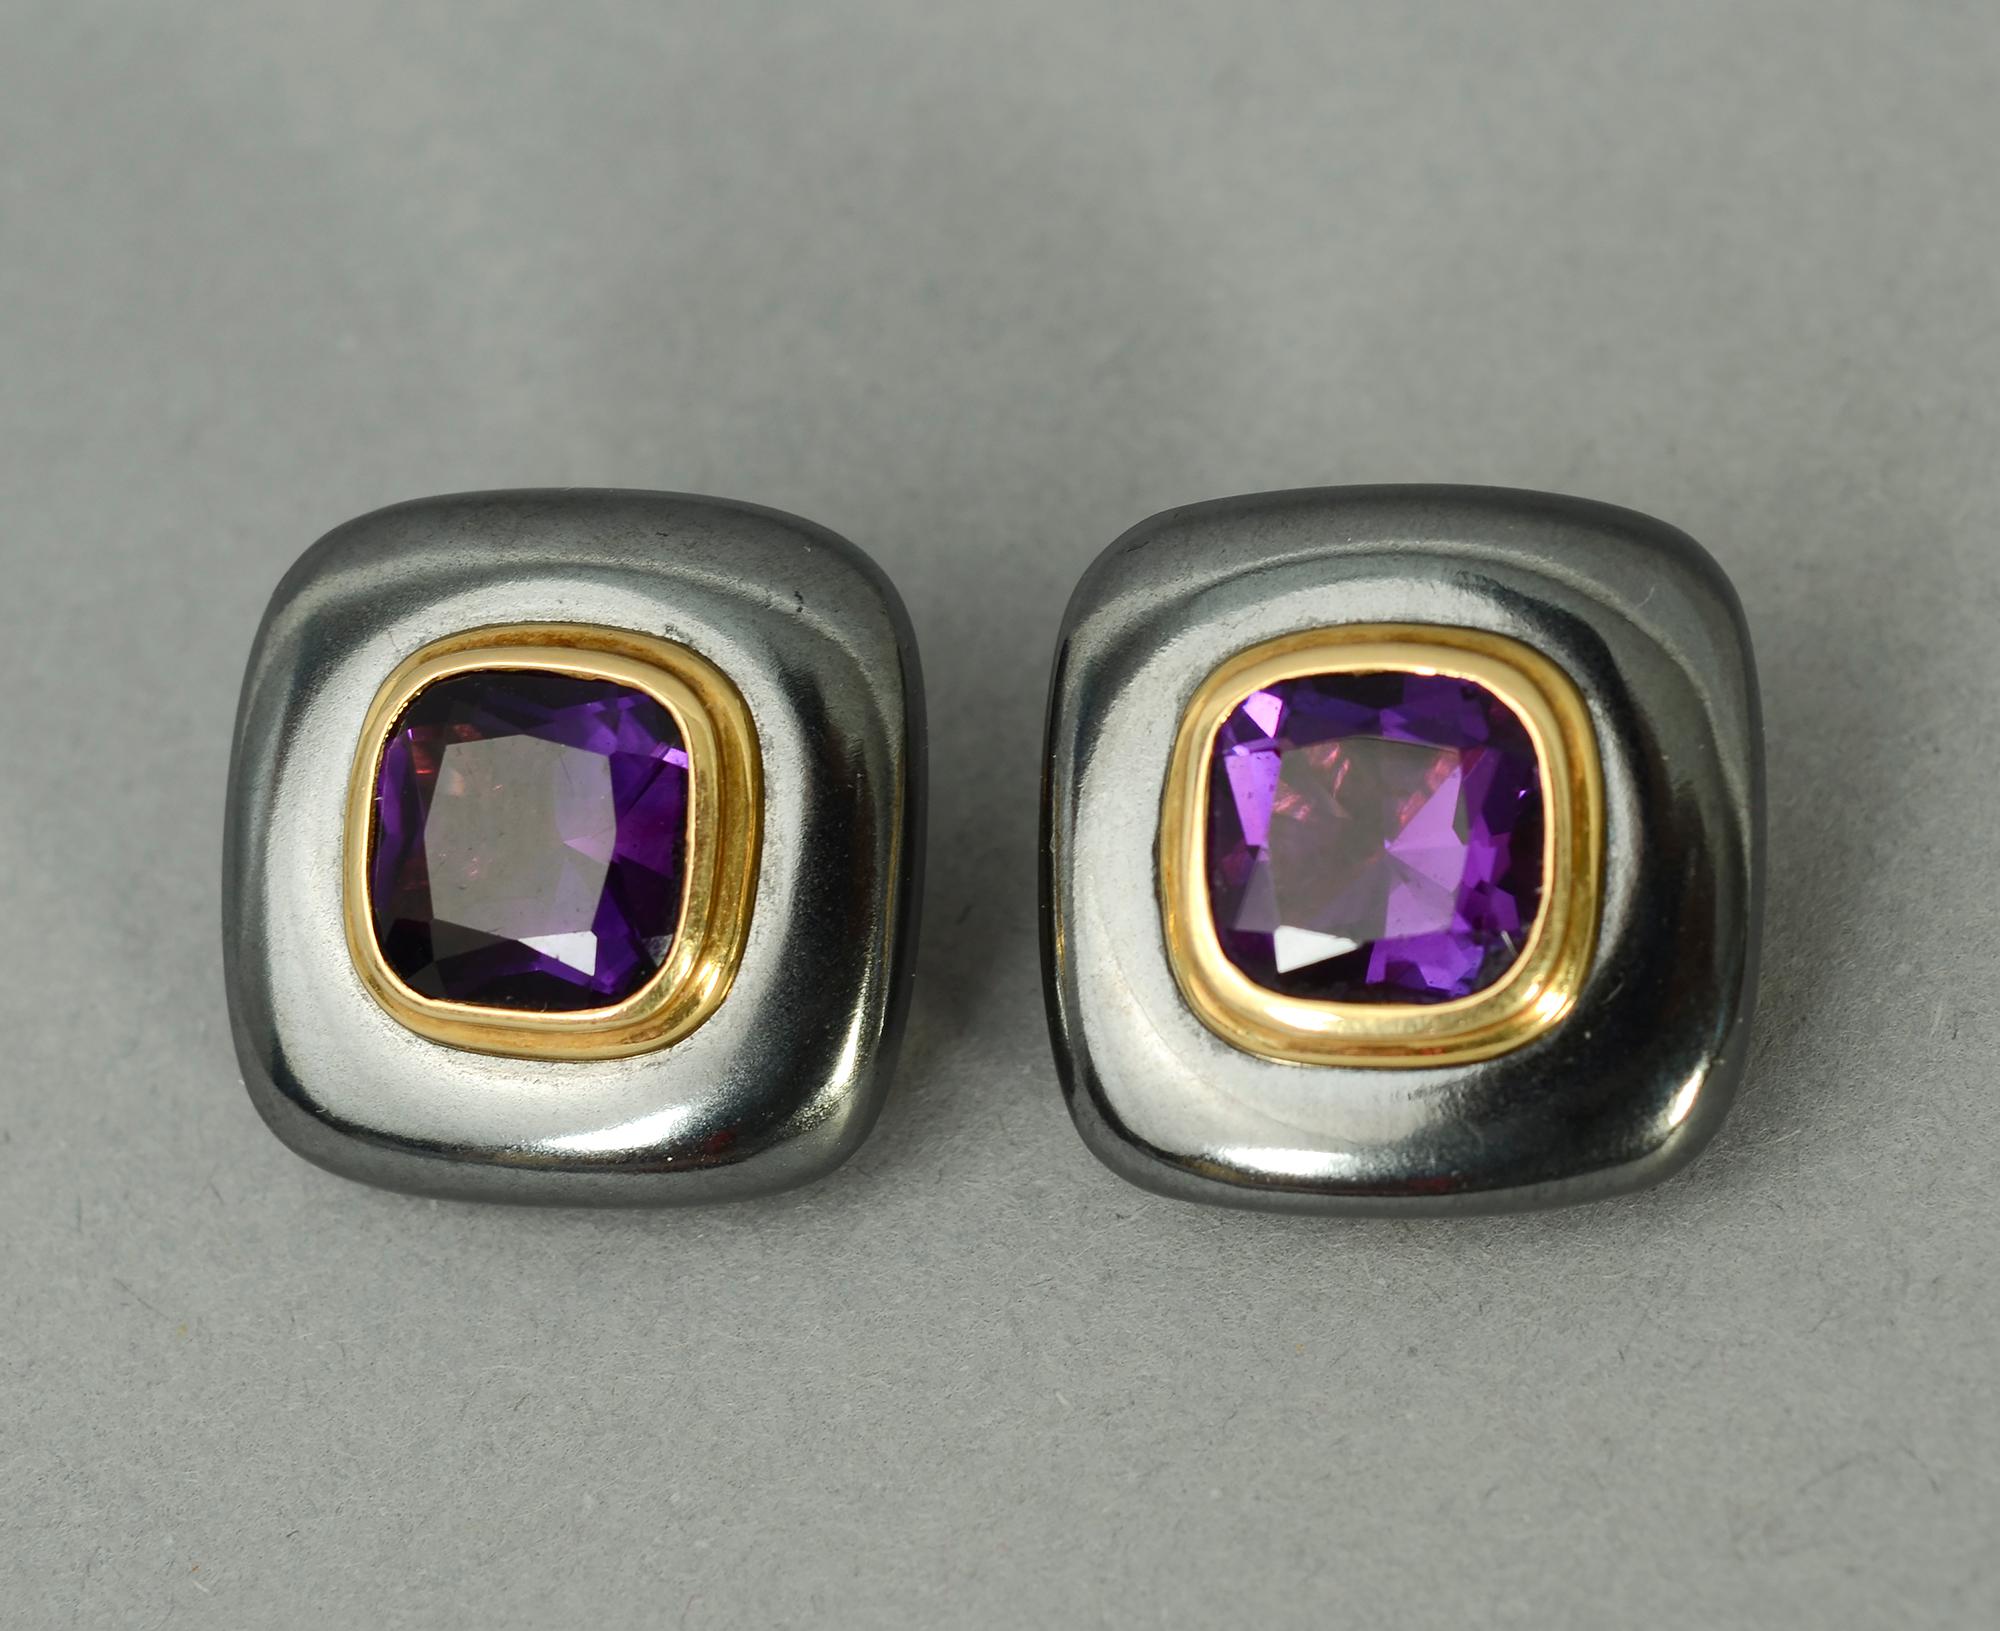 Sporty and sophisticated earrings of a hematite background centered with a gold band within which is a faceted amethyst. The 18 karat earrings have clip backs . Measurements are 3/4 